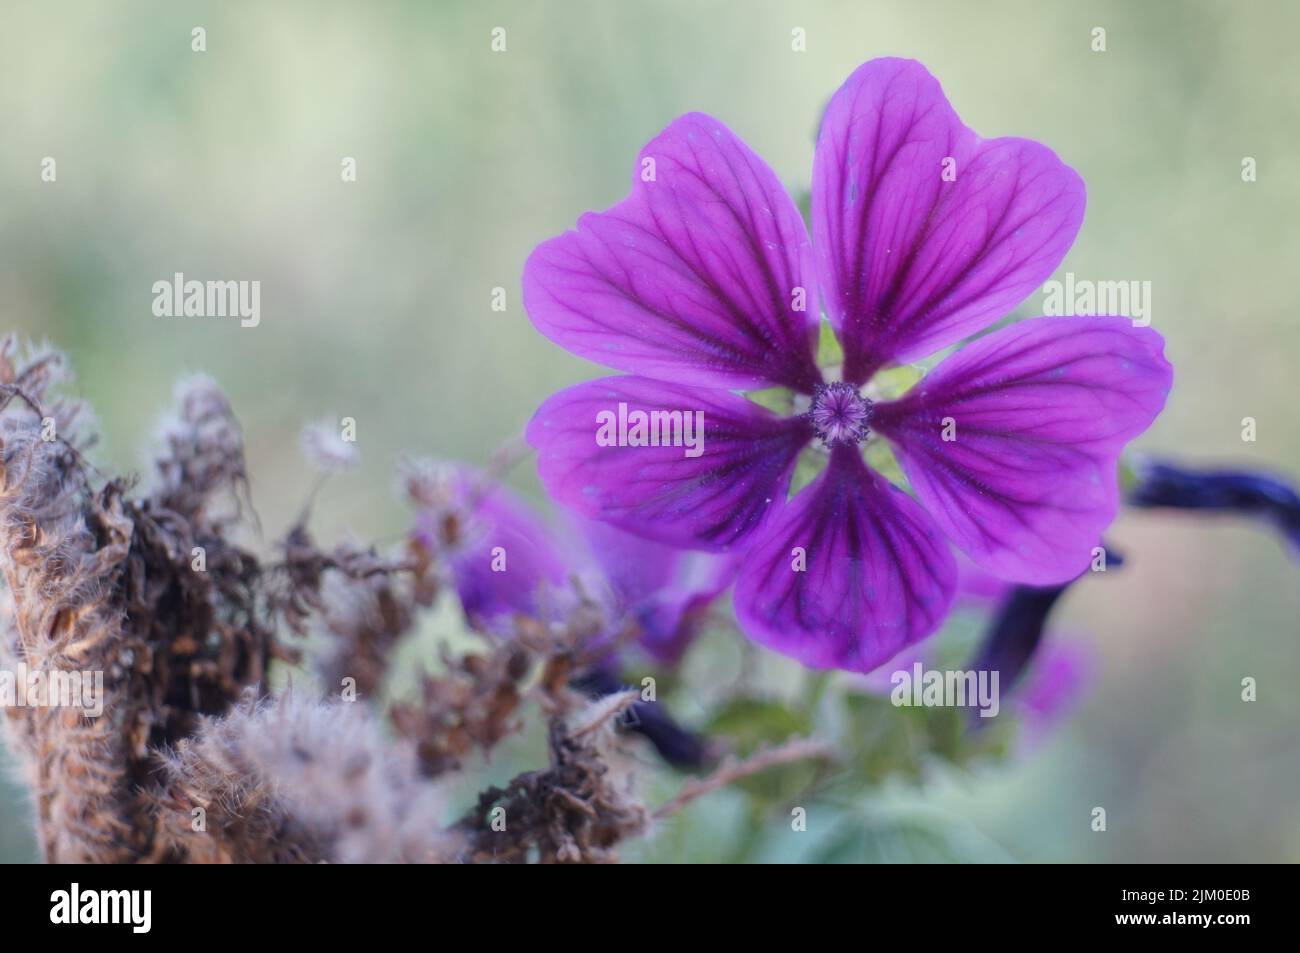 A bright flower of high mallow in the blurred background Stock Photo